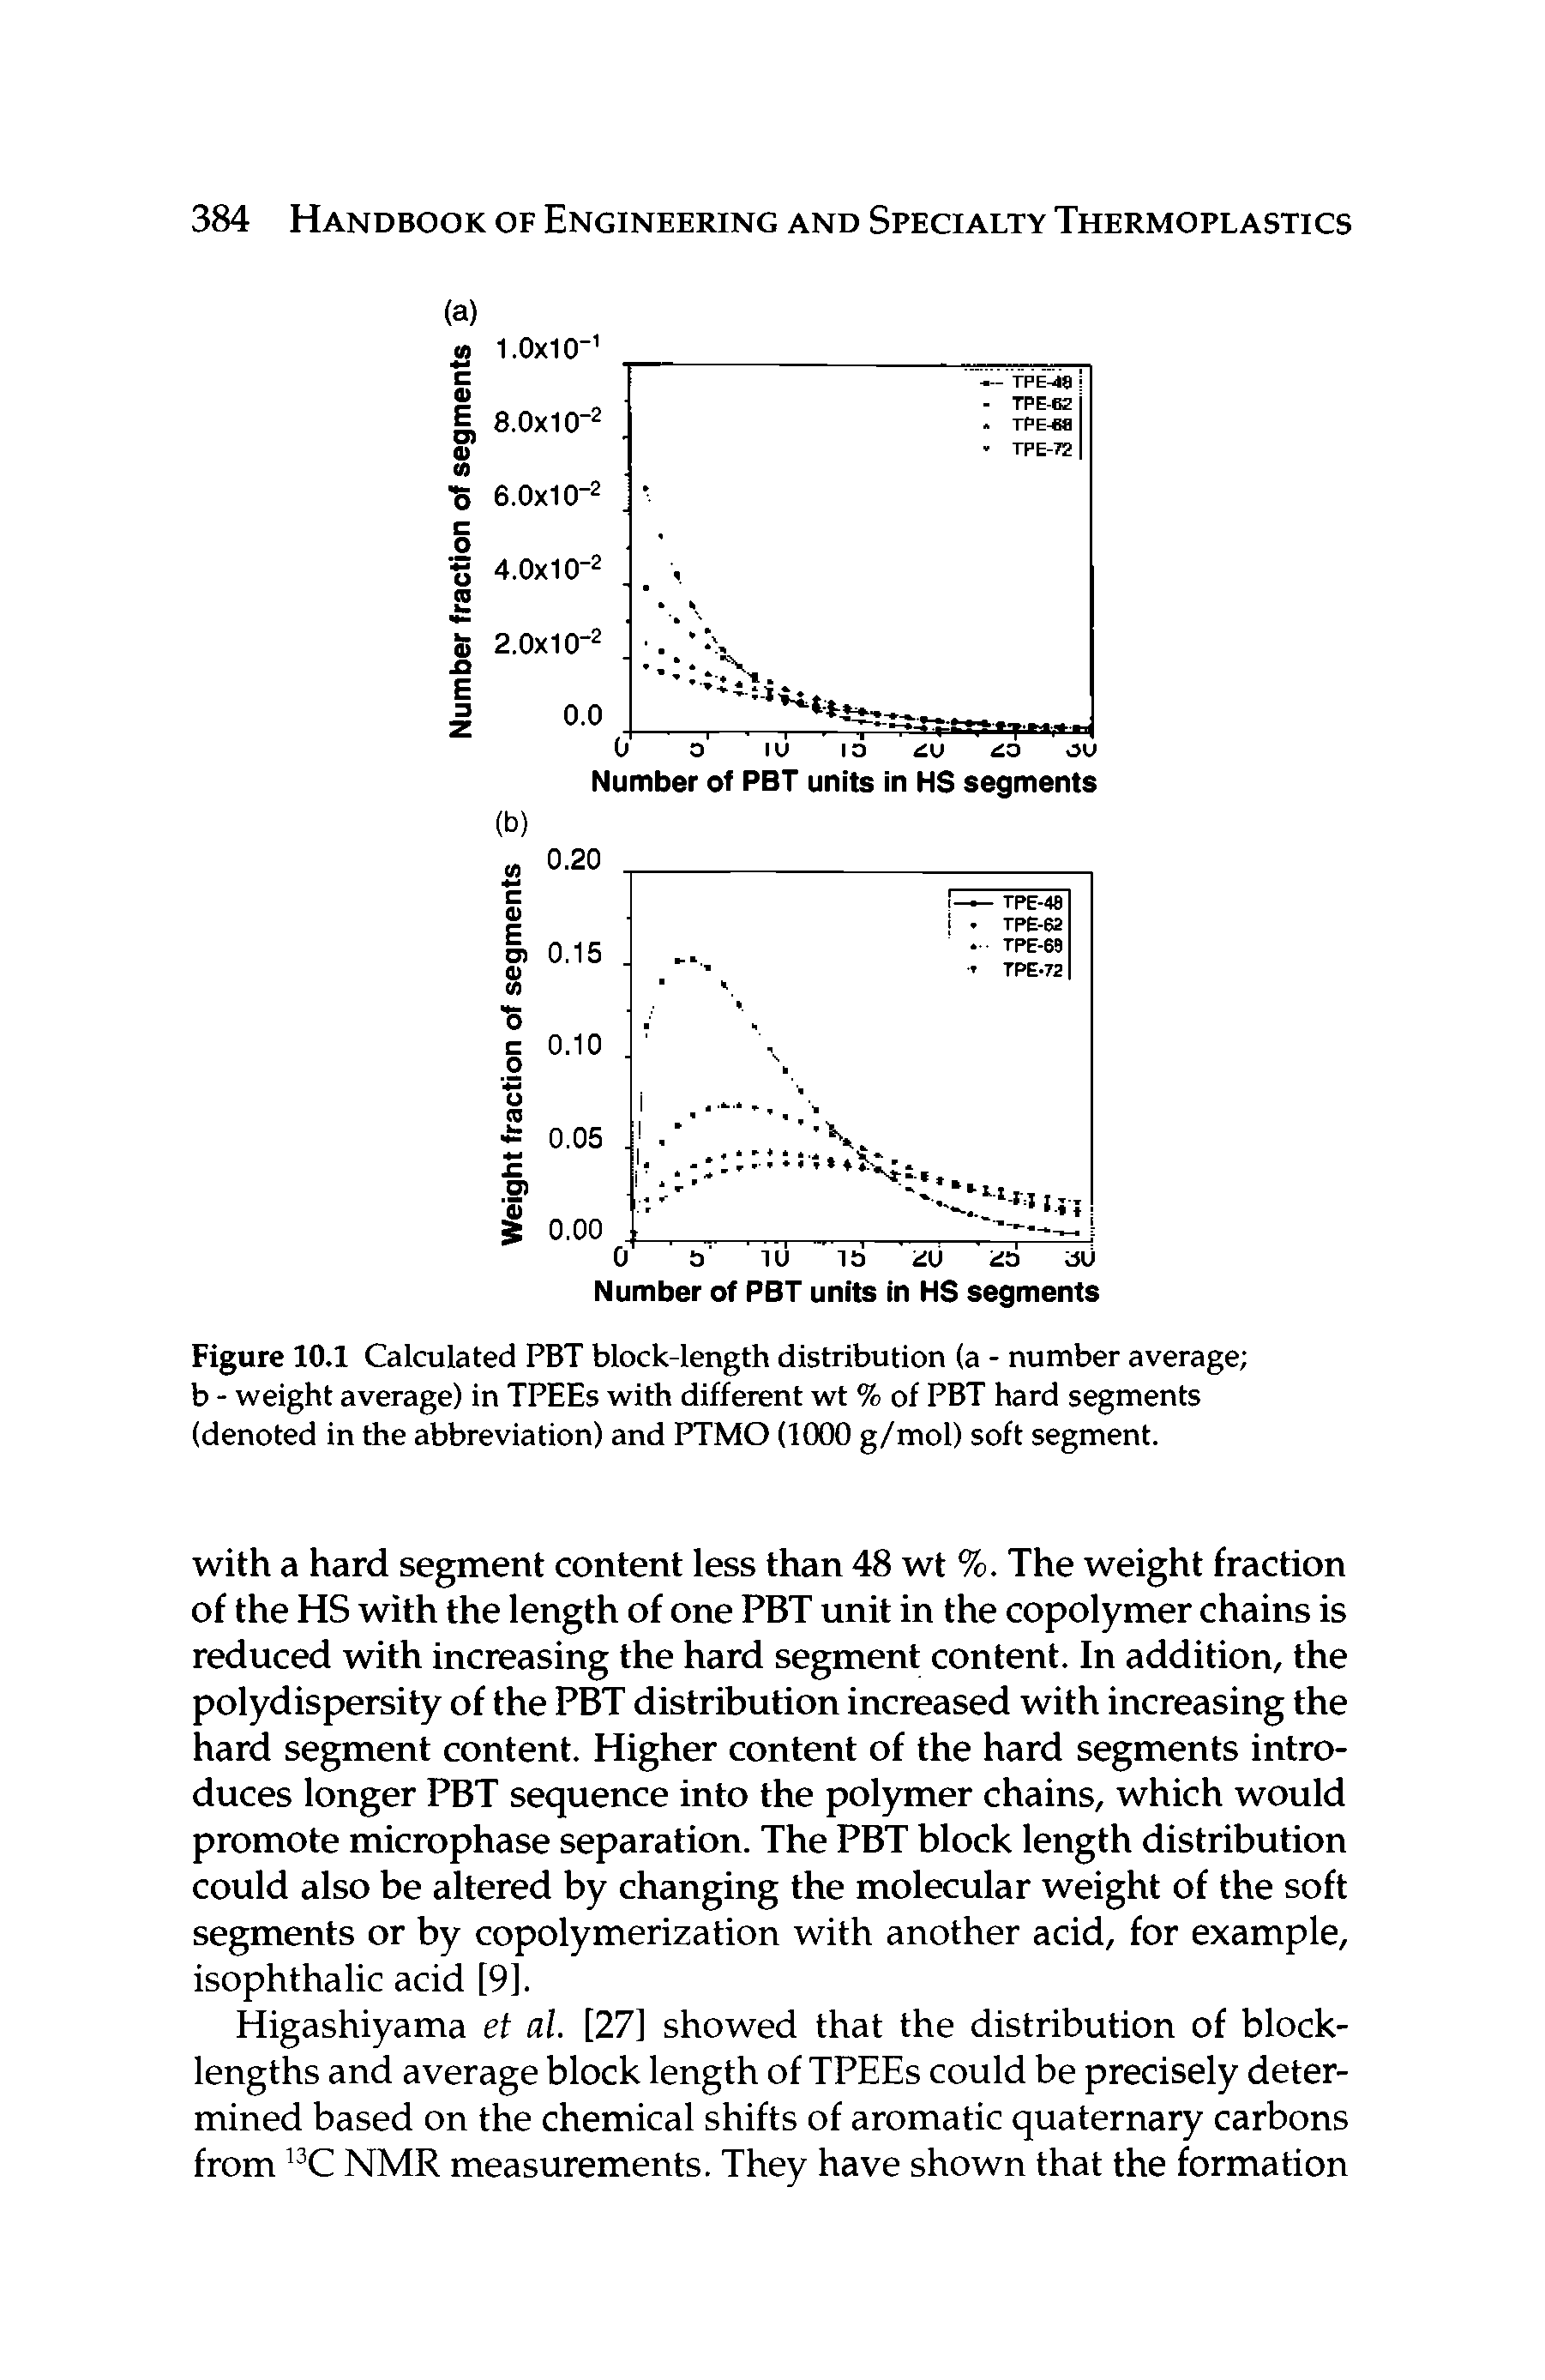 Figure 10.1 Calculated PBT block-length distribution (a - number average b - weight average) in TPEEs with different wt % of PBT hard segments (denoted in the abbreviation) and PTMO (1000 g/mol) soft segment.